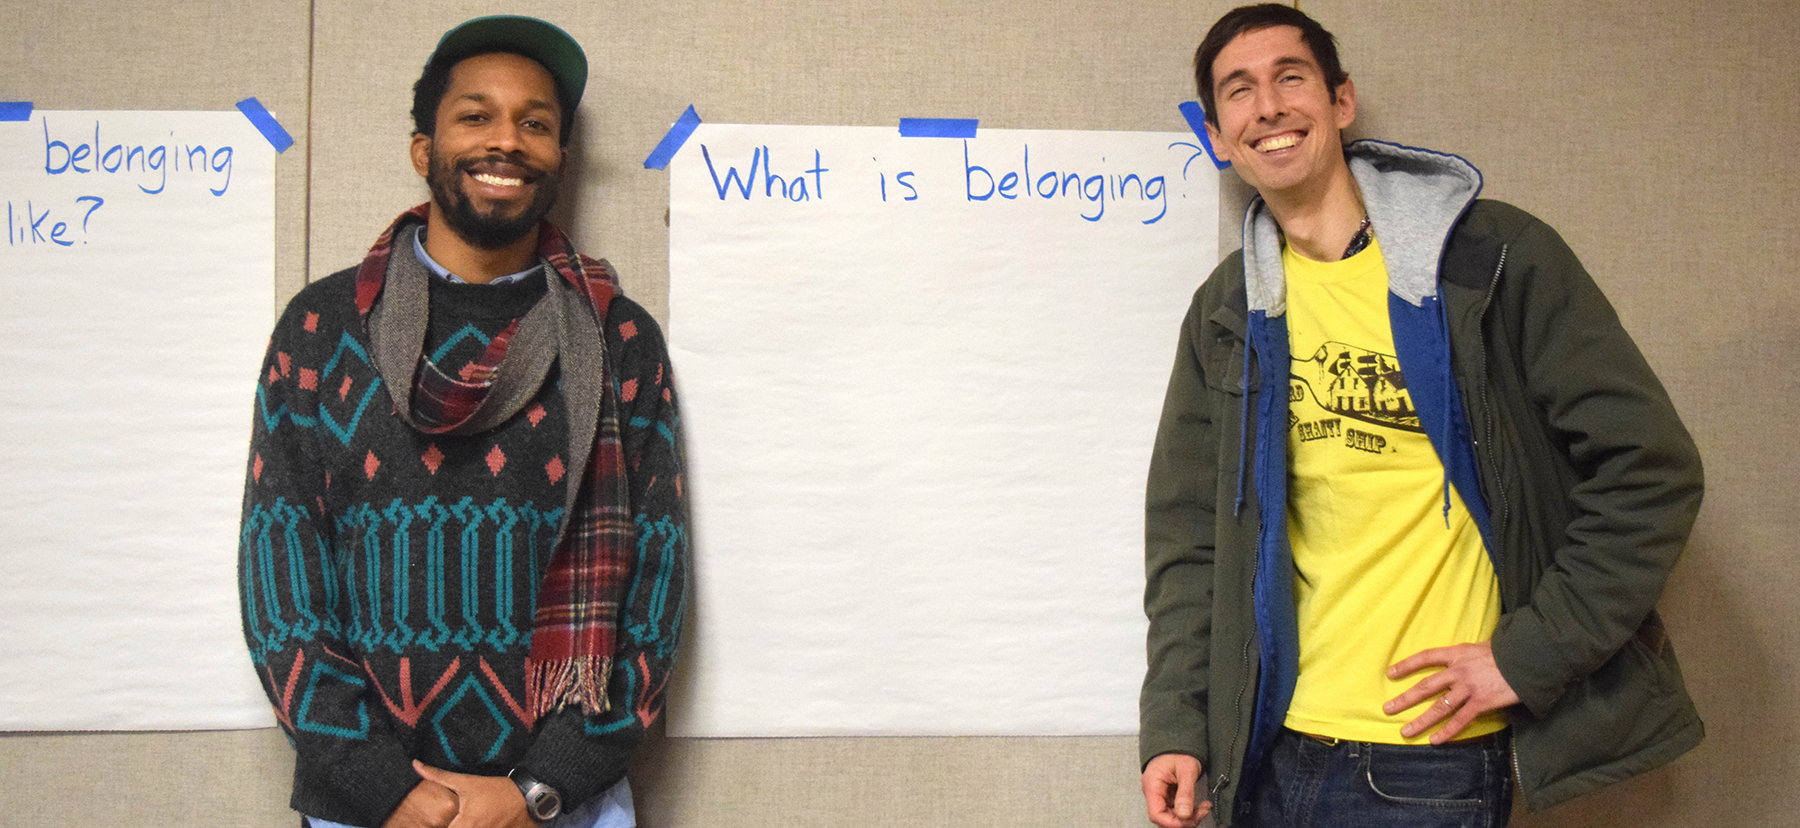 Sterling Duns and Caselli Jordan stand in front of a large piece of paper asking what "belonging" is